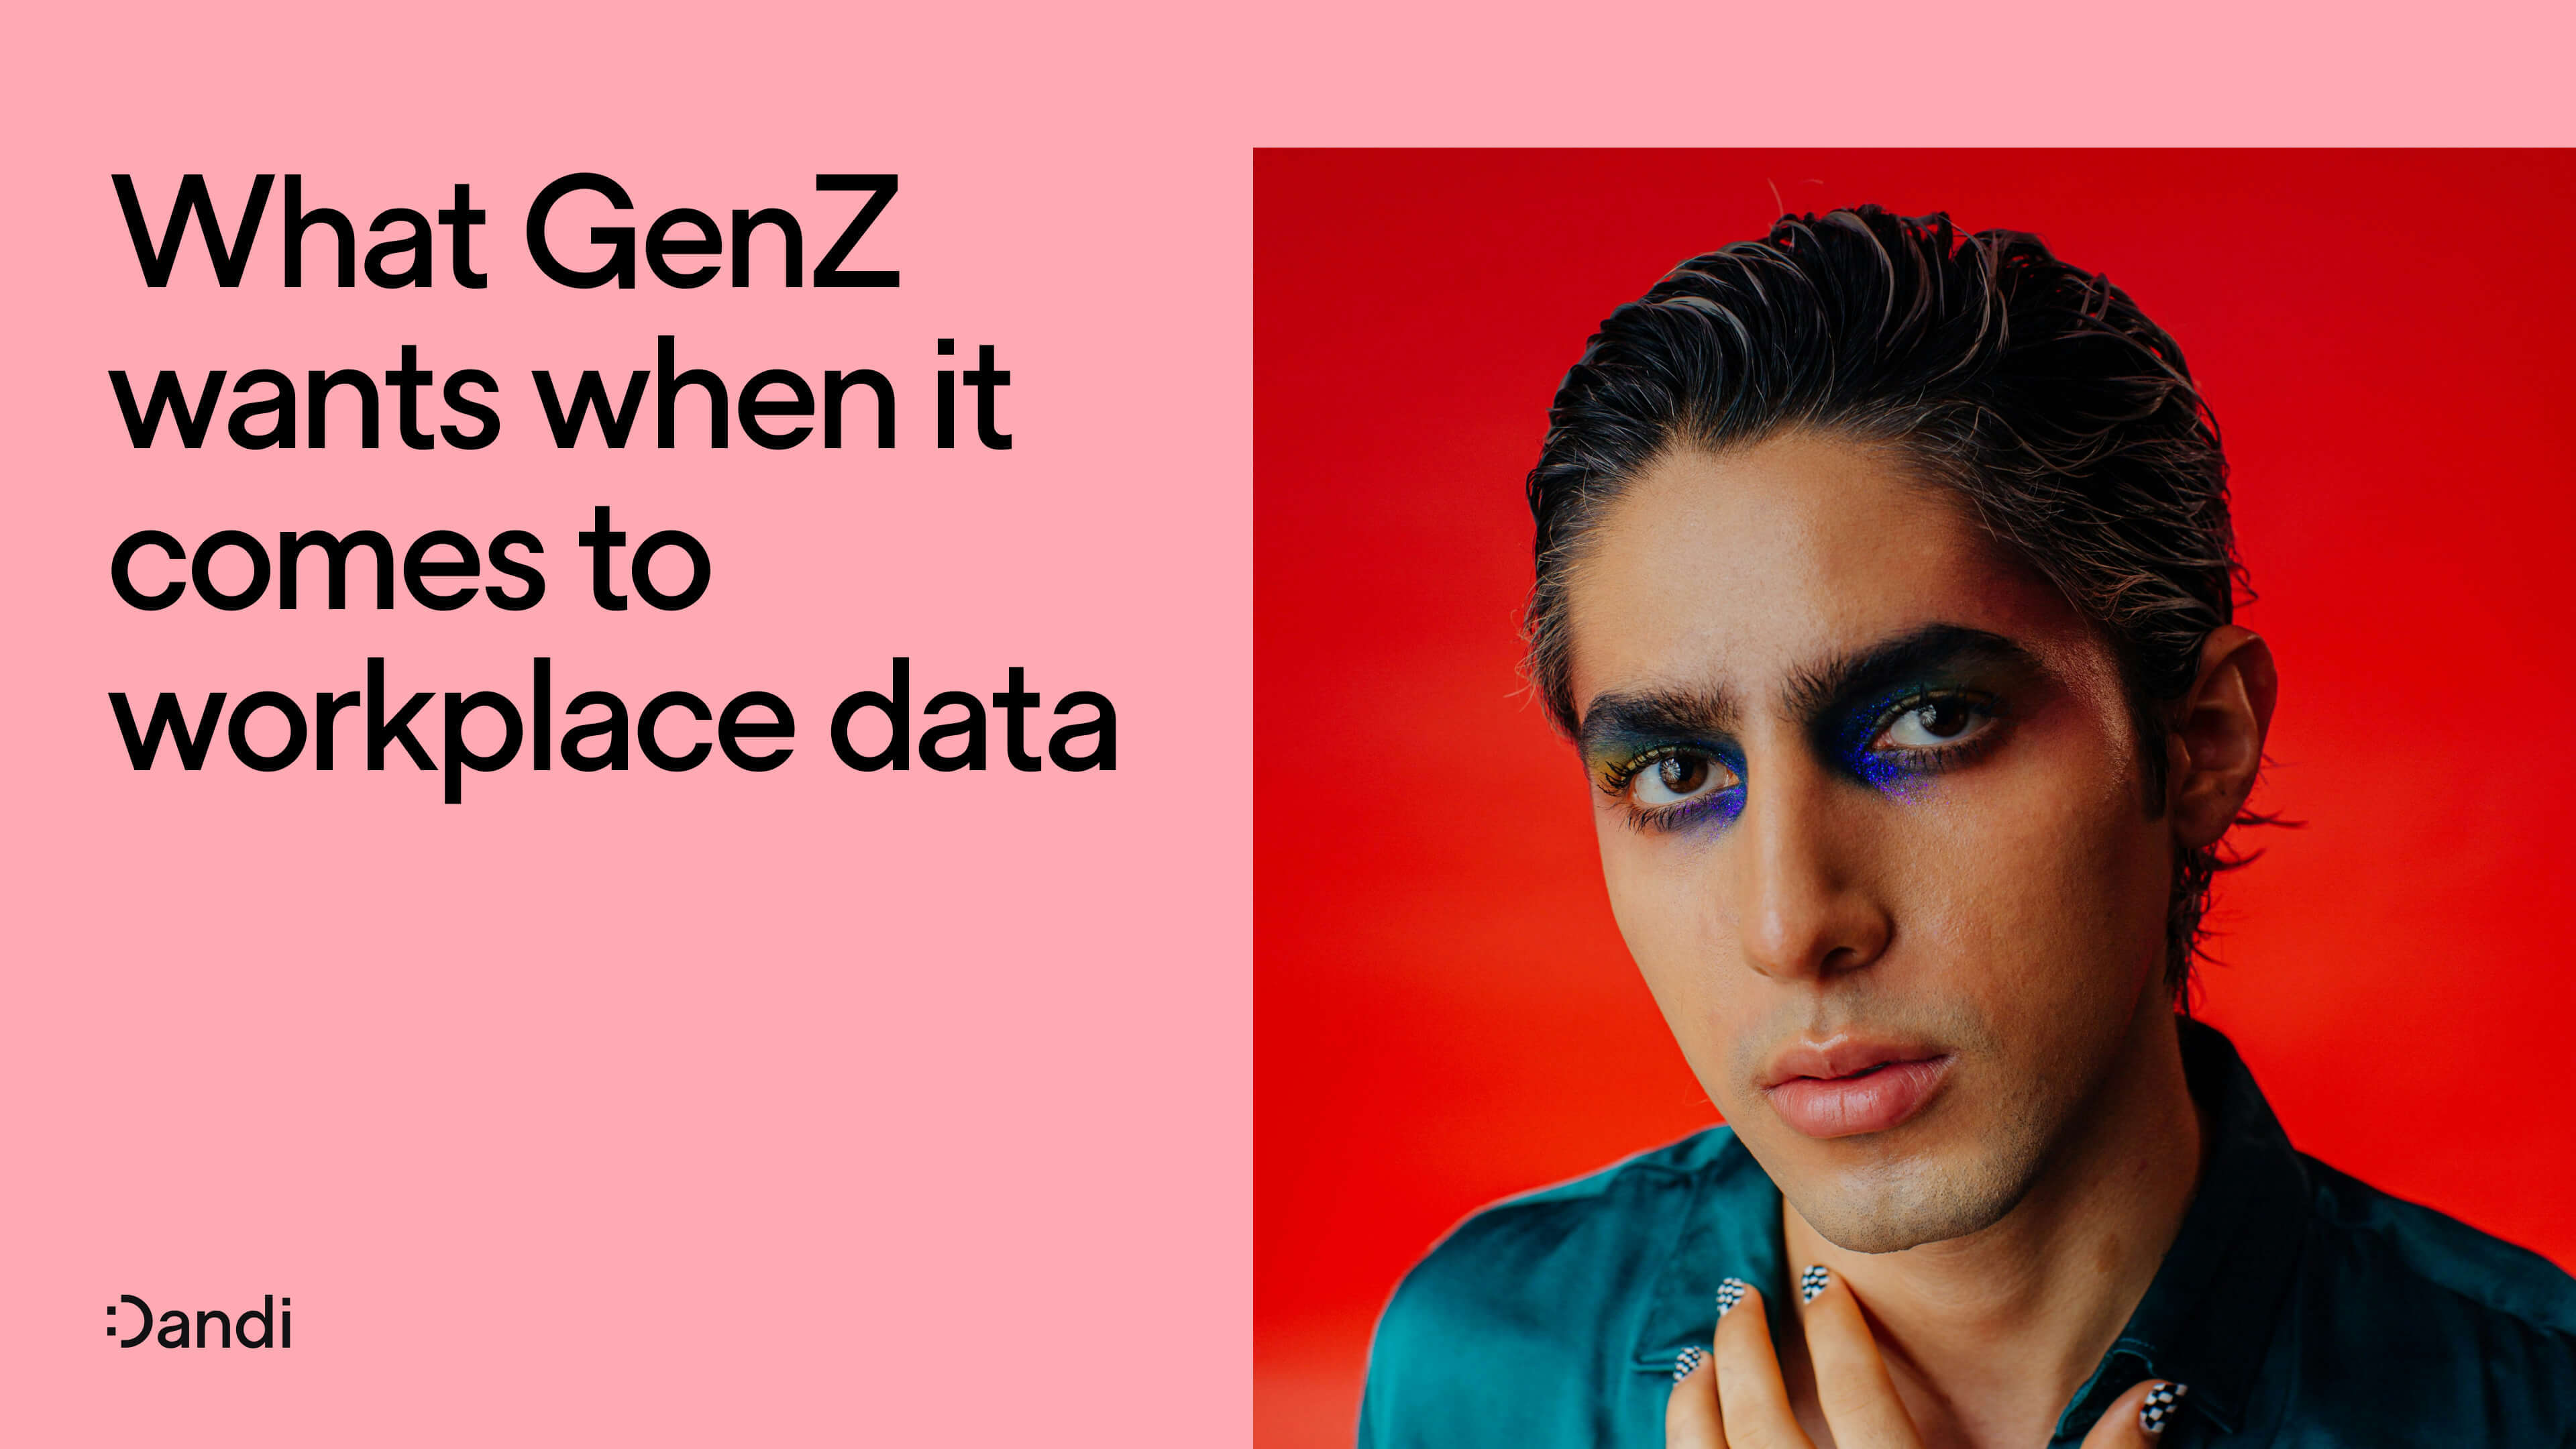 A person with dark, slicked-back hair wearing sparkly eye shadow. They're wearing a silky turquoise shirt. Copy accompanying the image reads "What GenZ wants when it comes to workplace data."